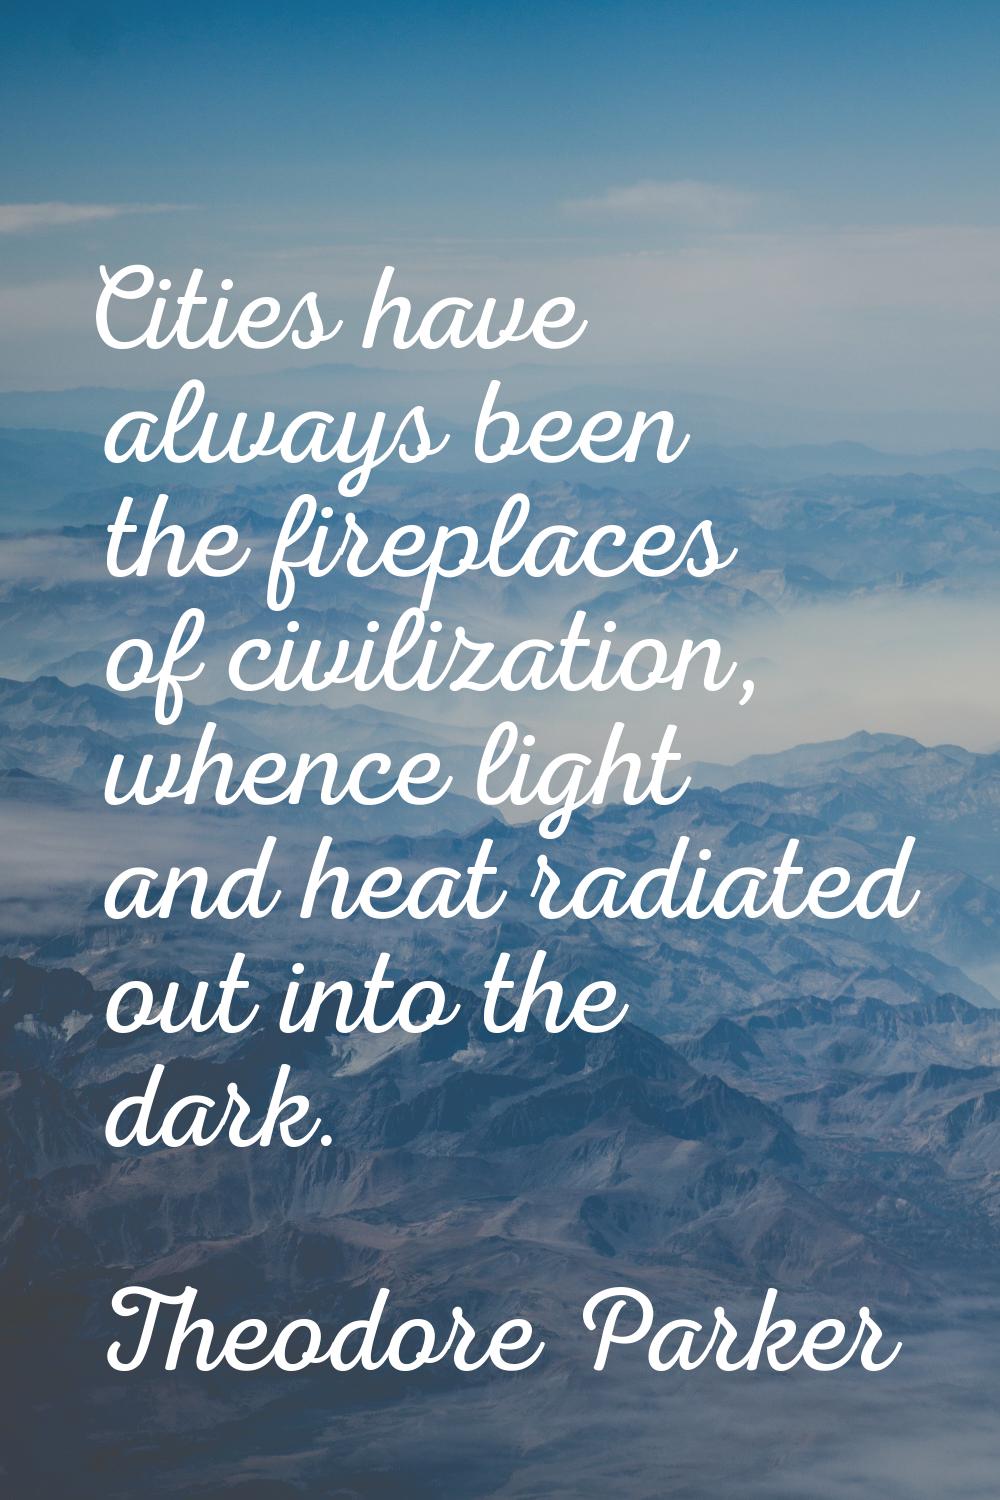 Cities have always been the fireplaces of civilization, whence light and heat radiated out into the